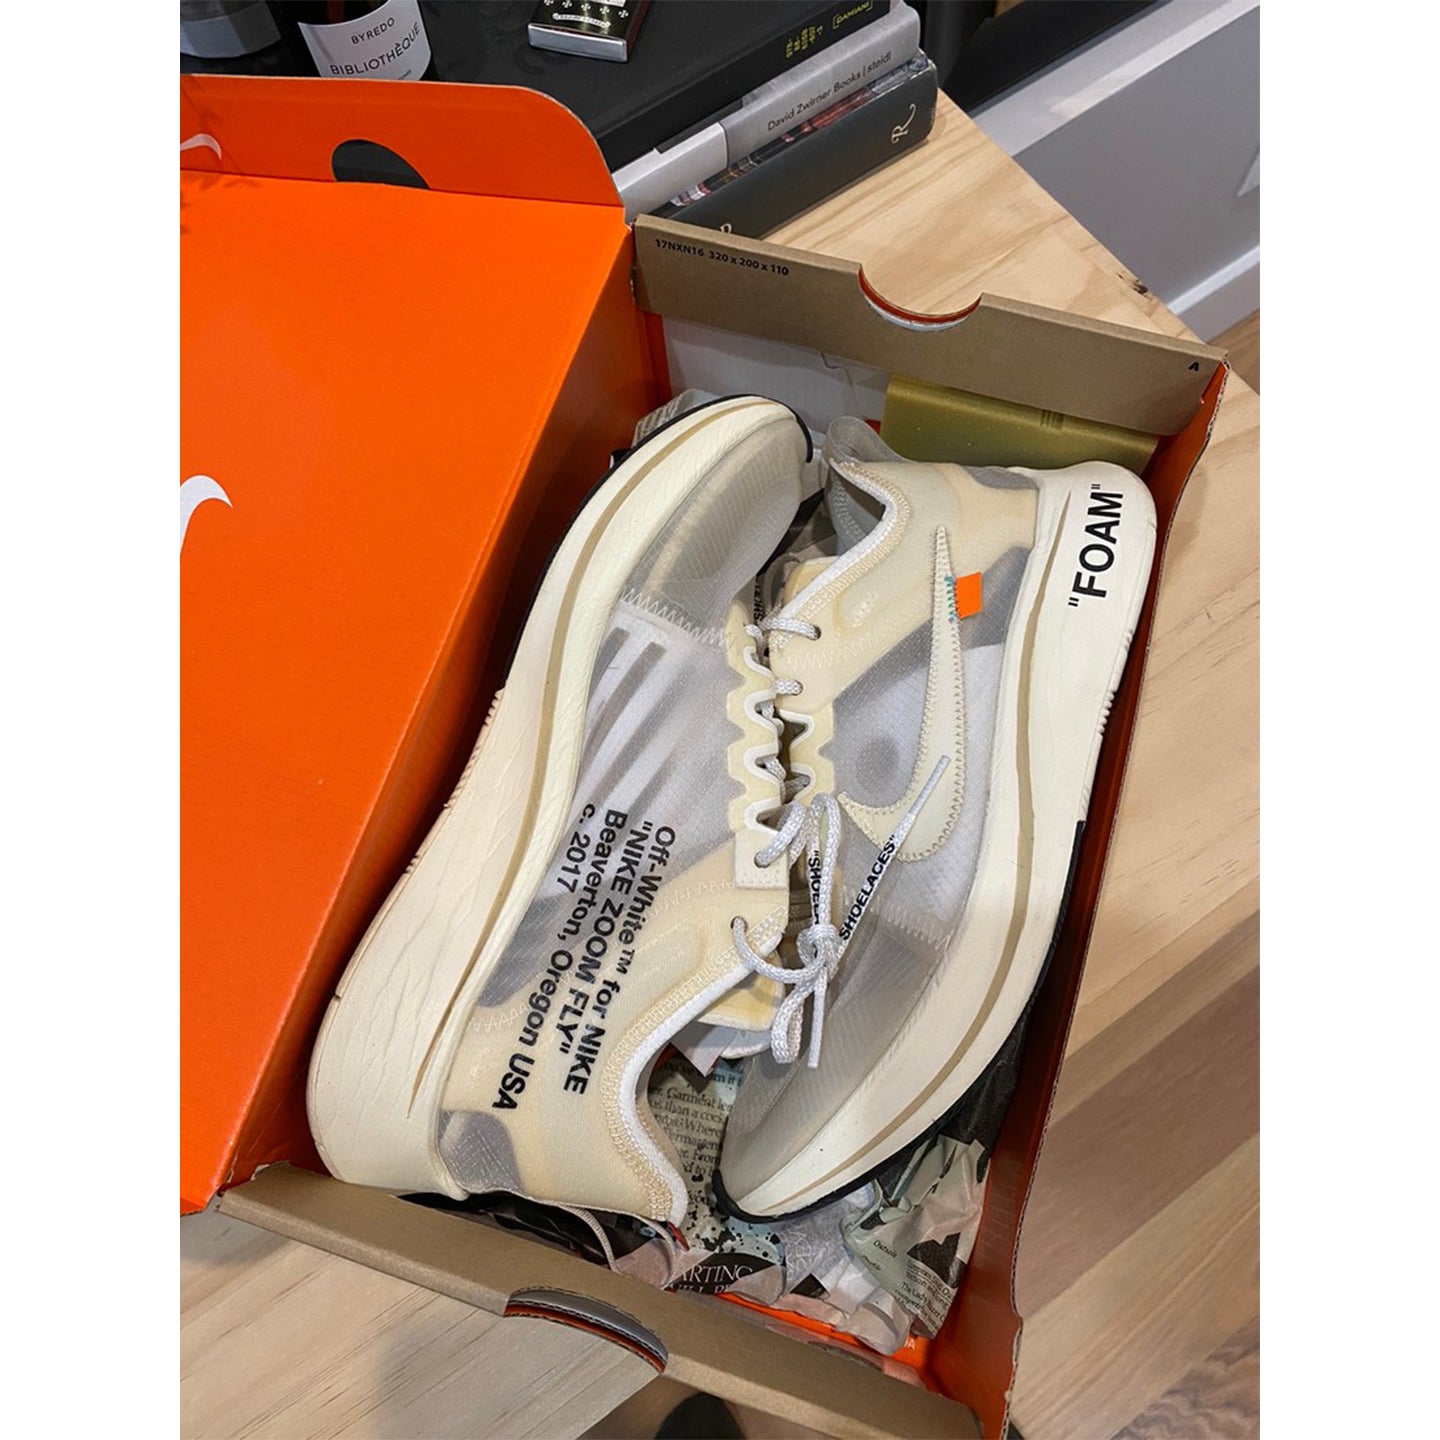 Zoom Fly Off-White The Ten